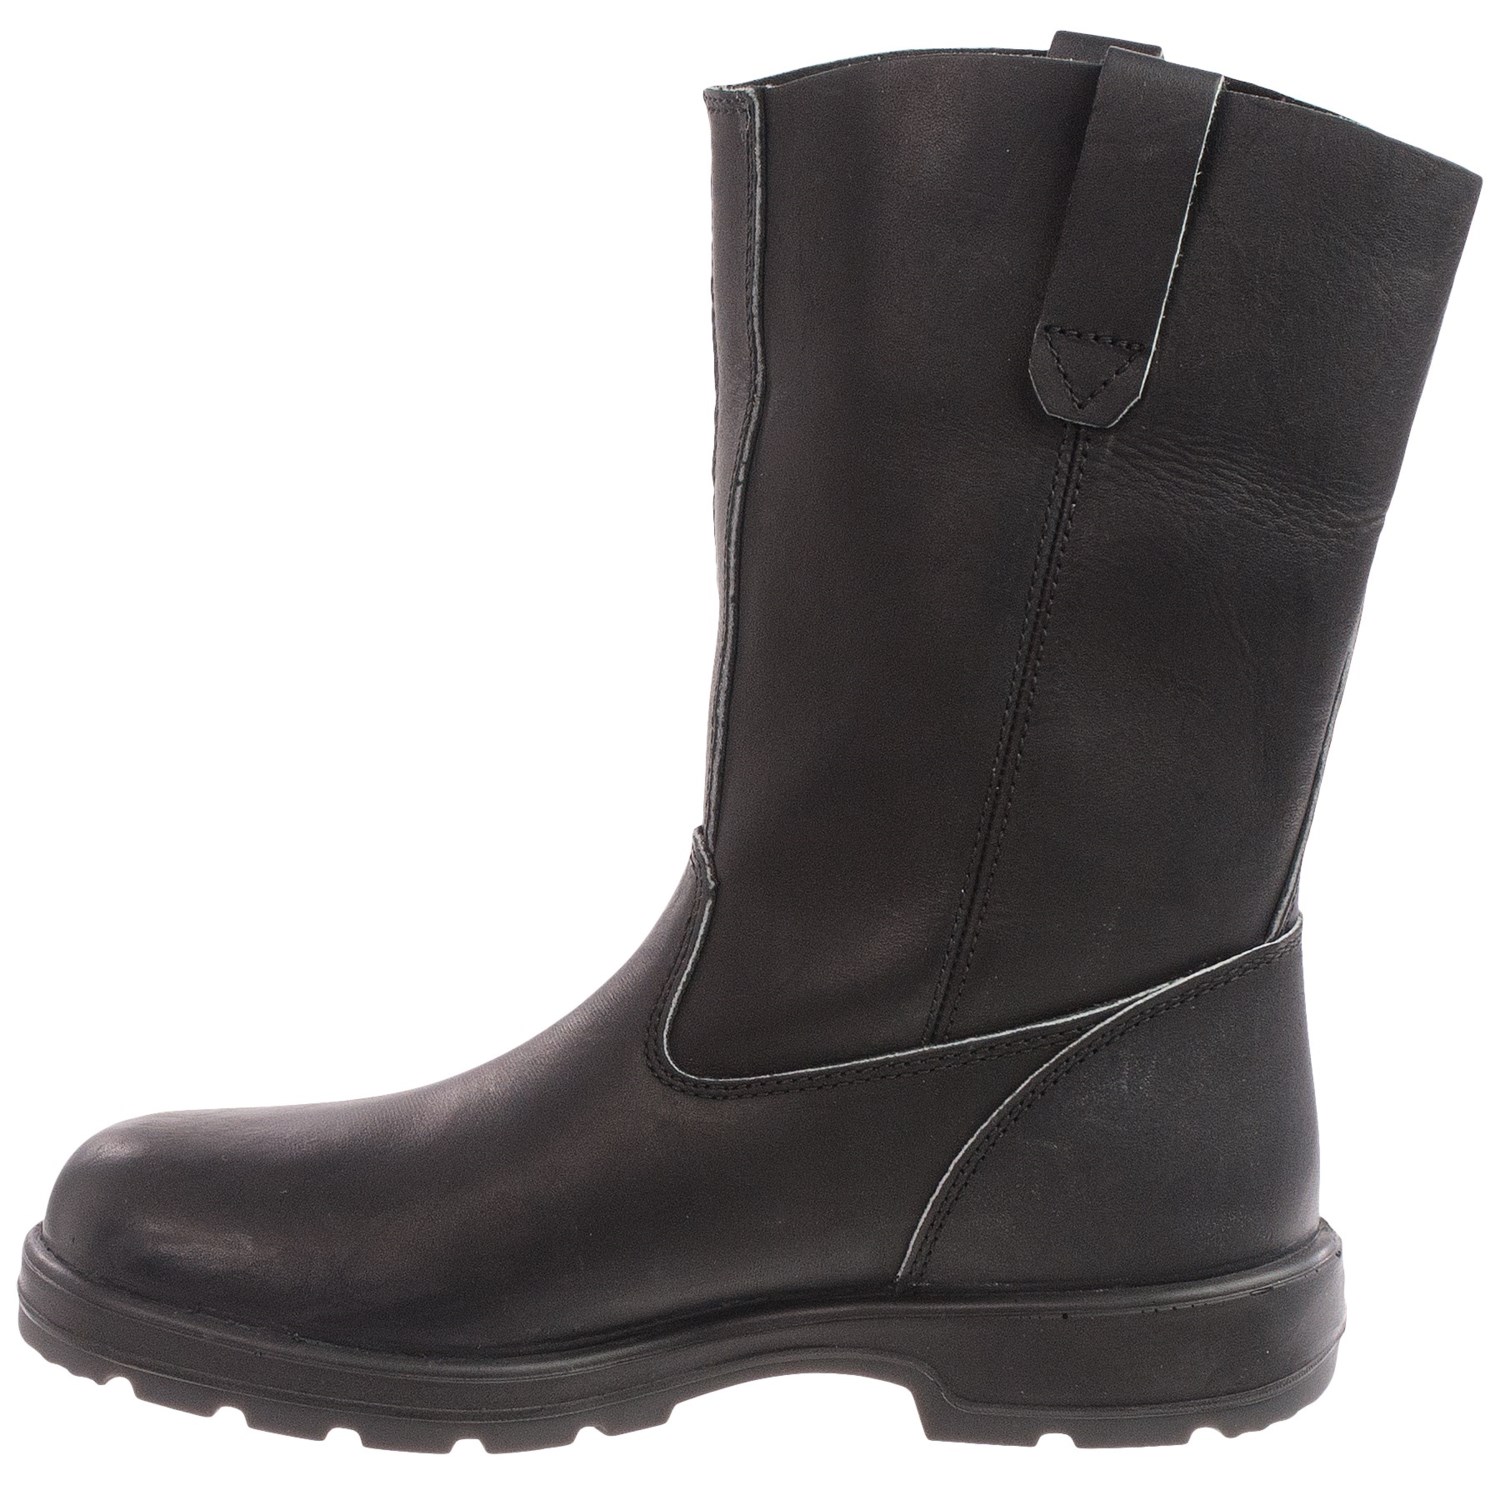 Blundstone 546 Rigger Boots (For Men and Women) 9870M - Save 42%